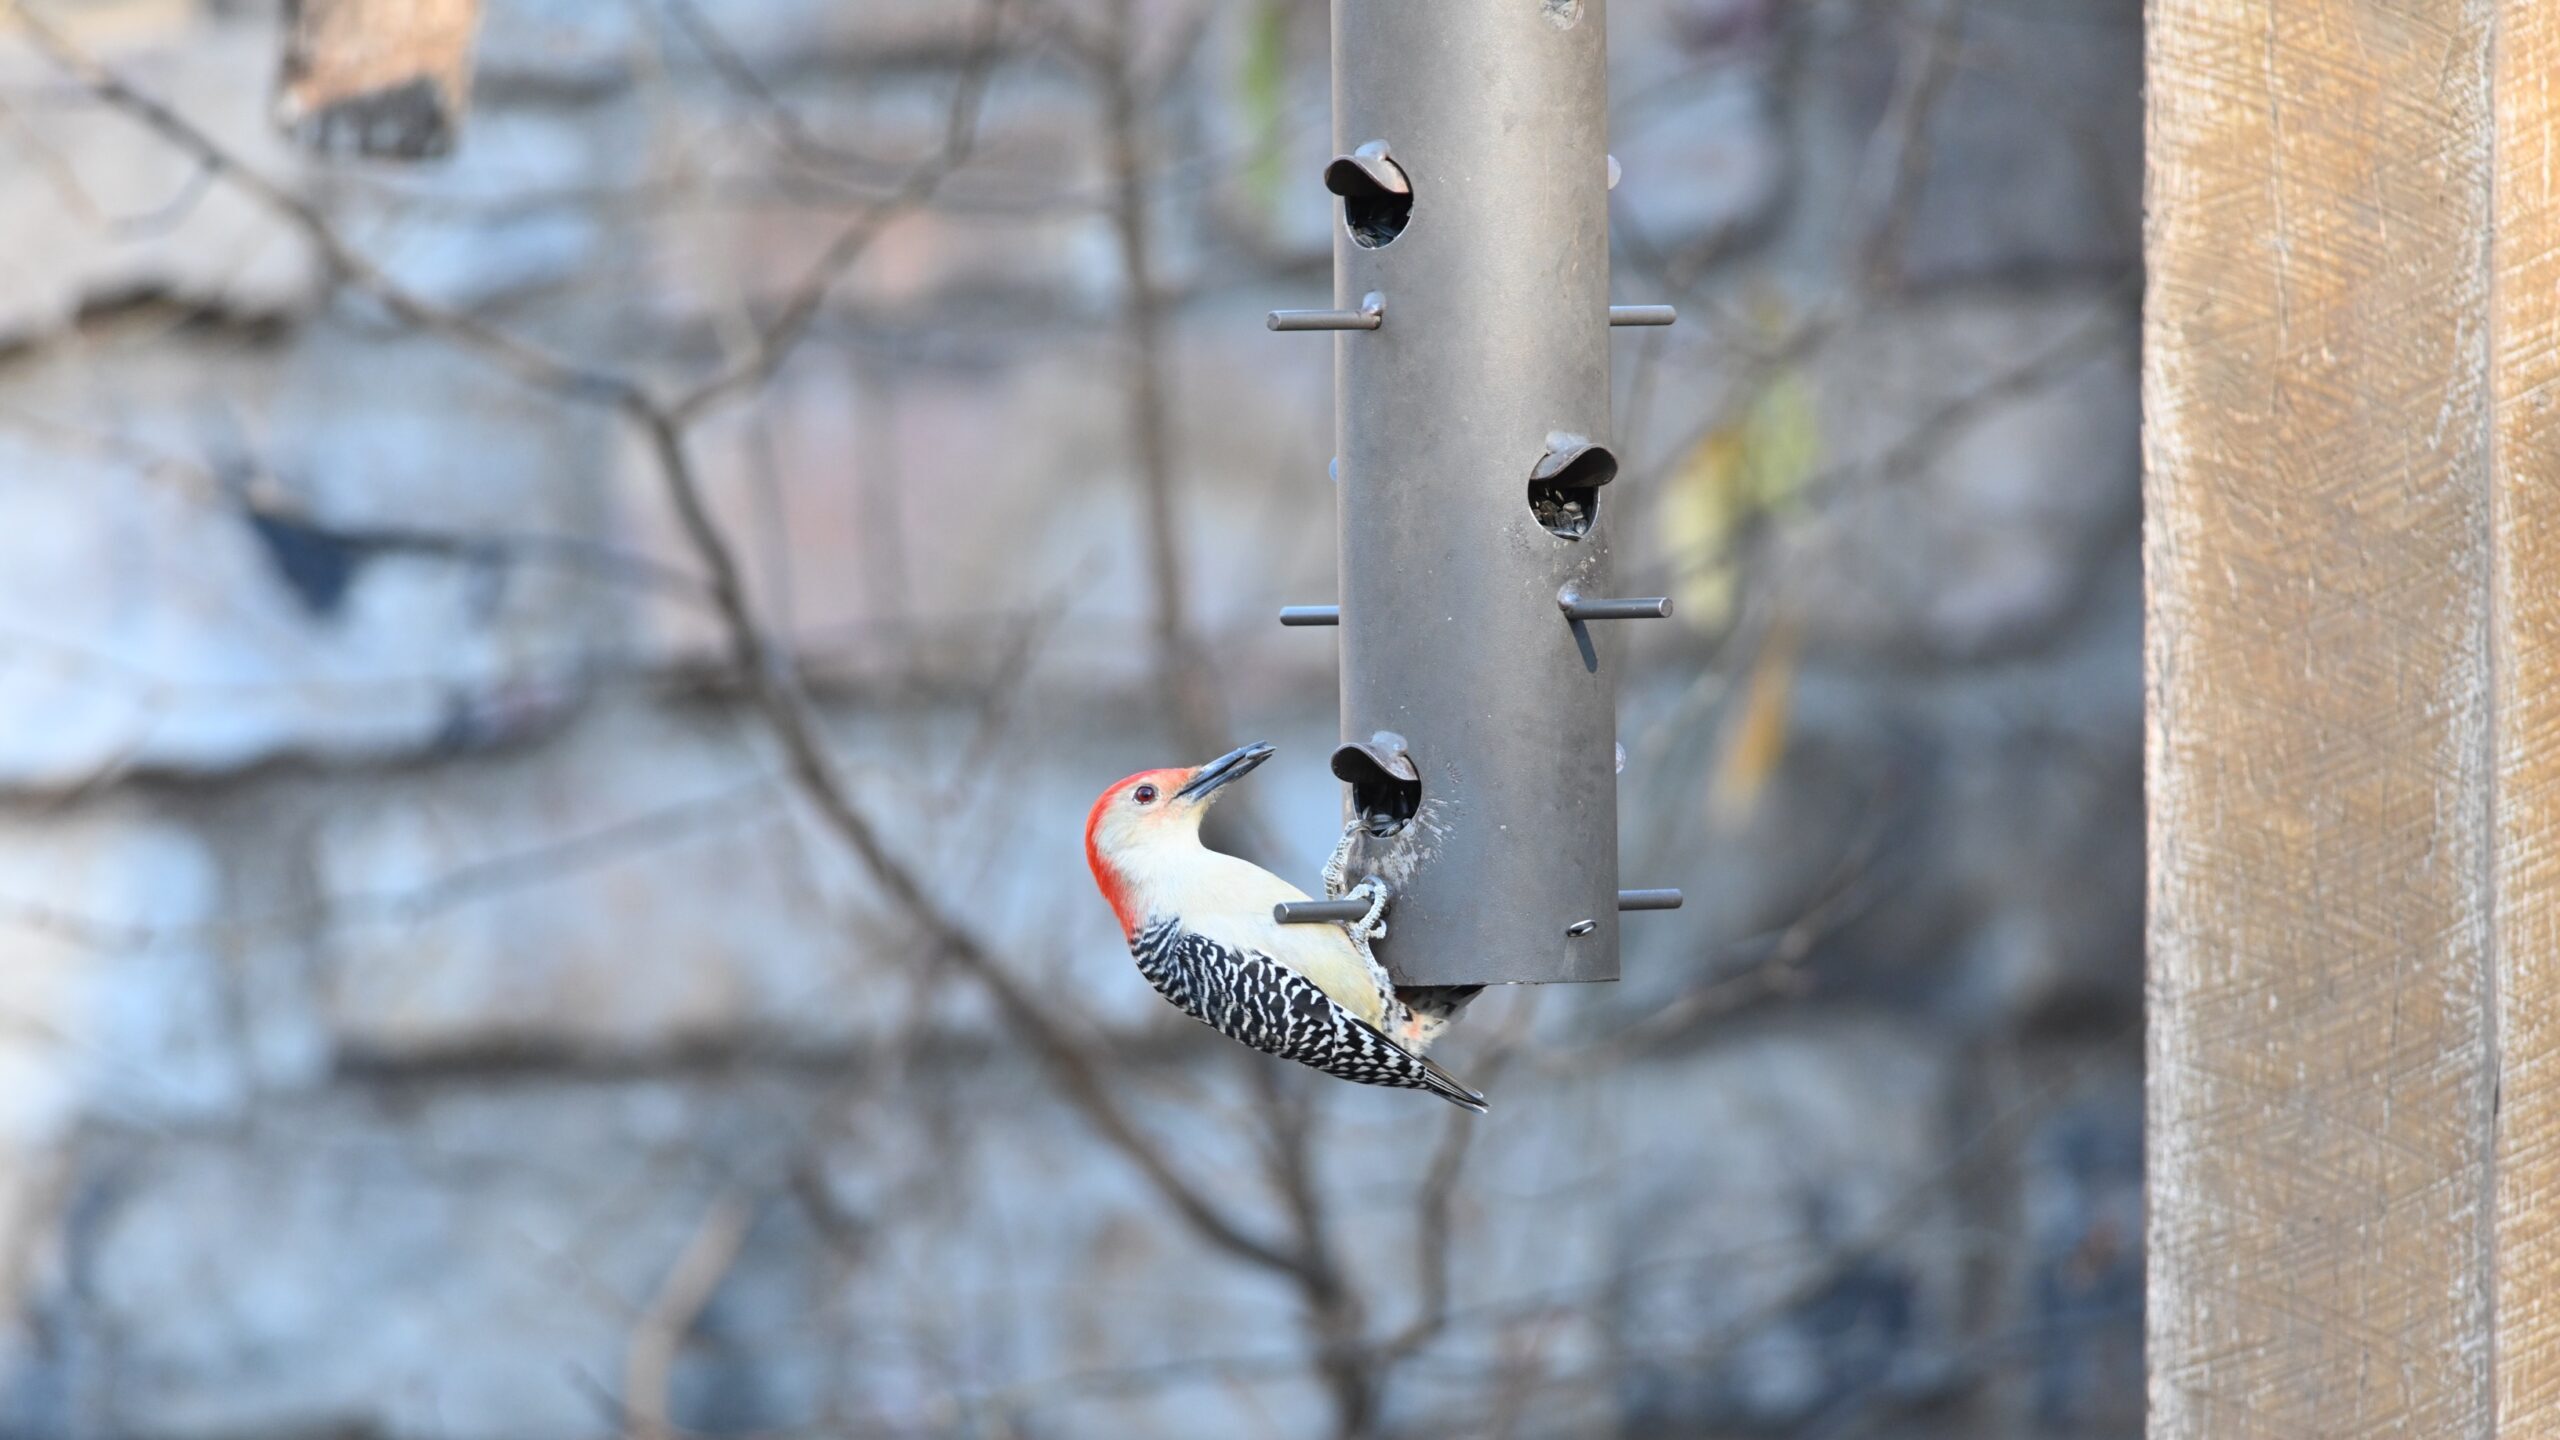 A Red-bellied Woodpecker eating from a tube feeder